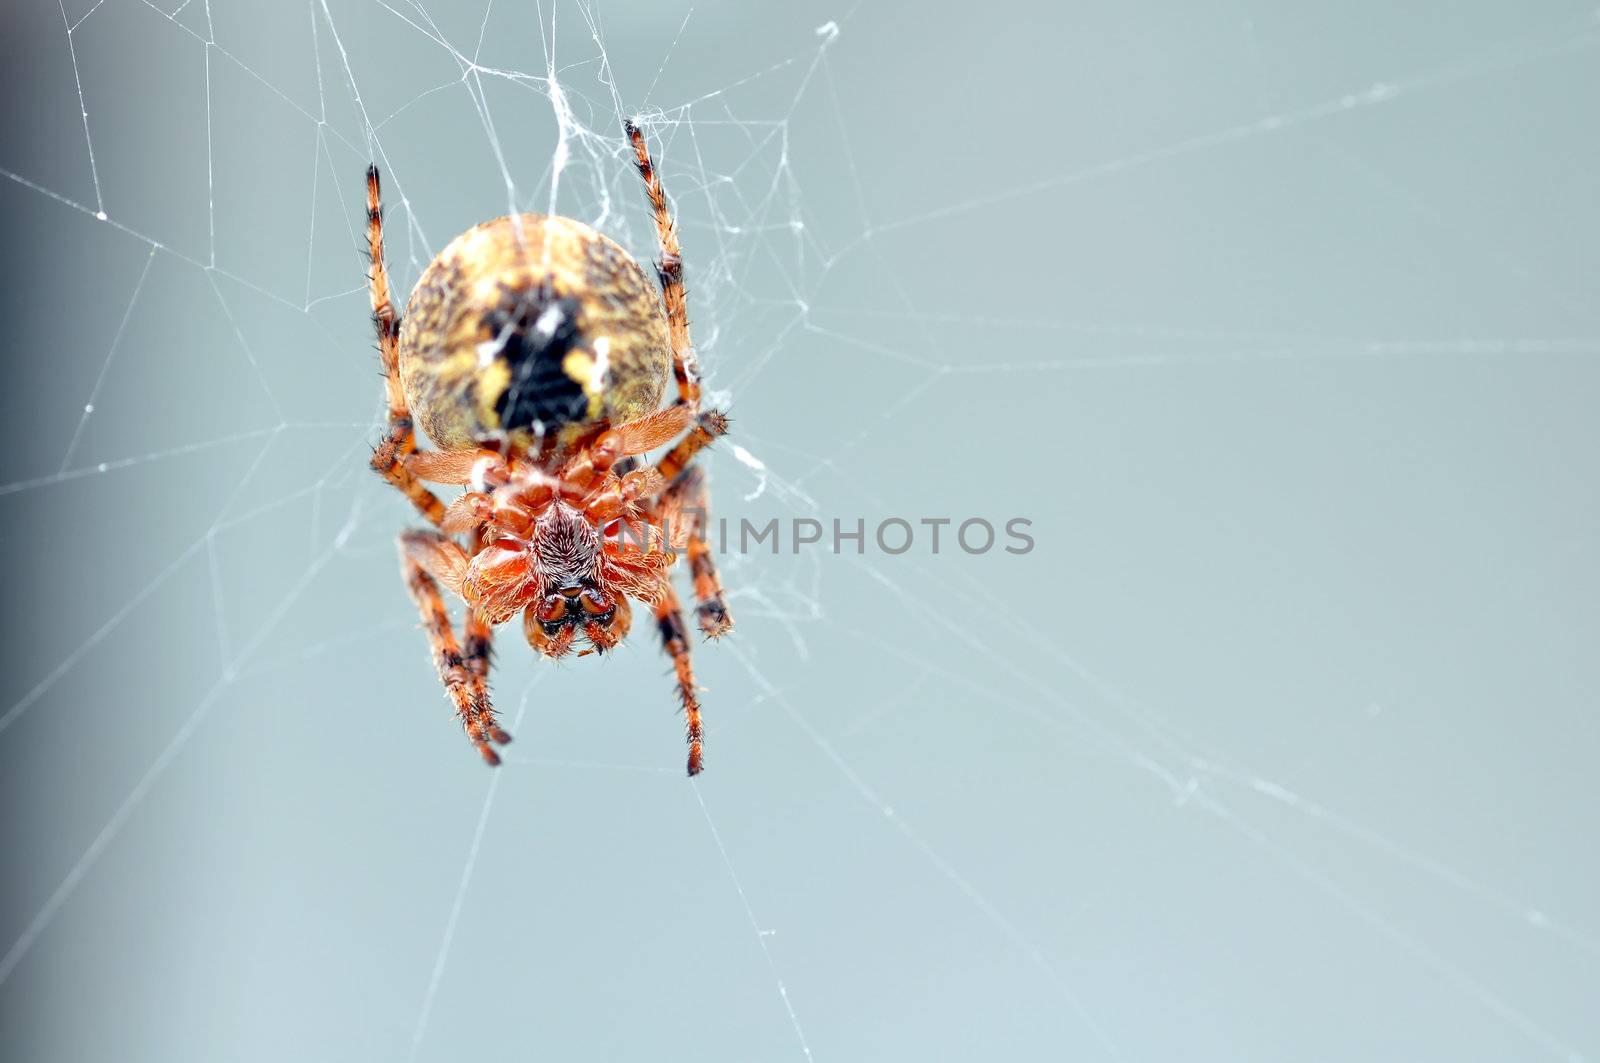 Underneath an orb weaver by Mirage3